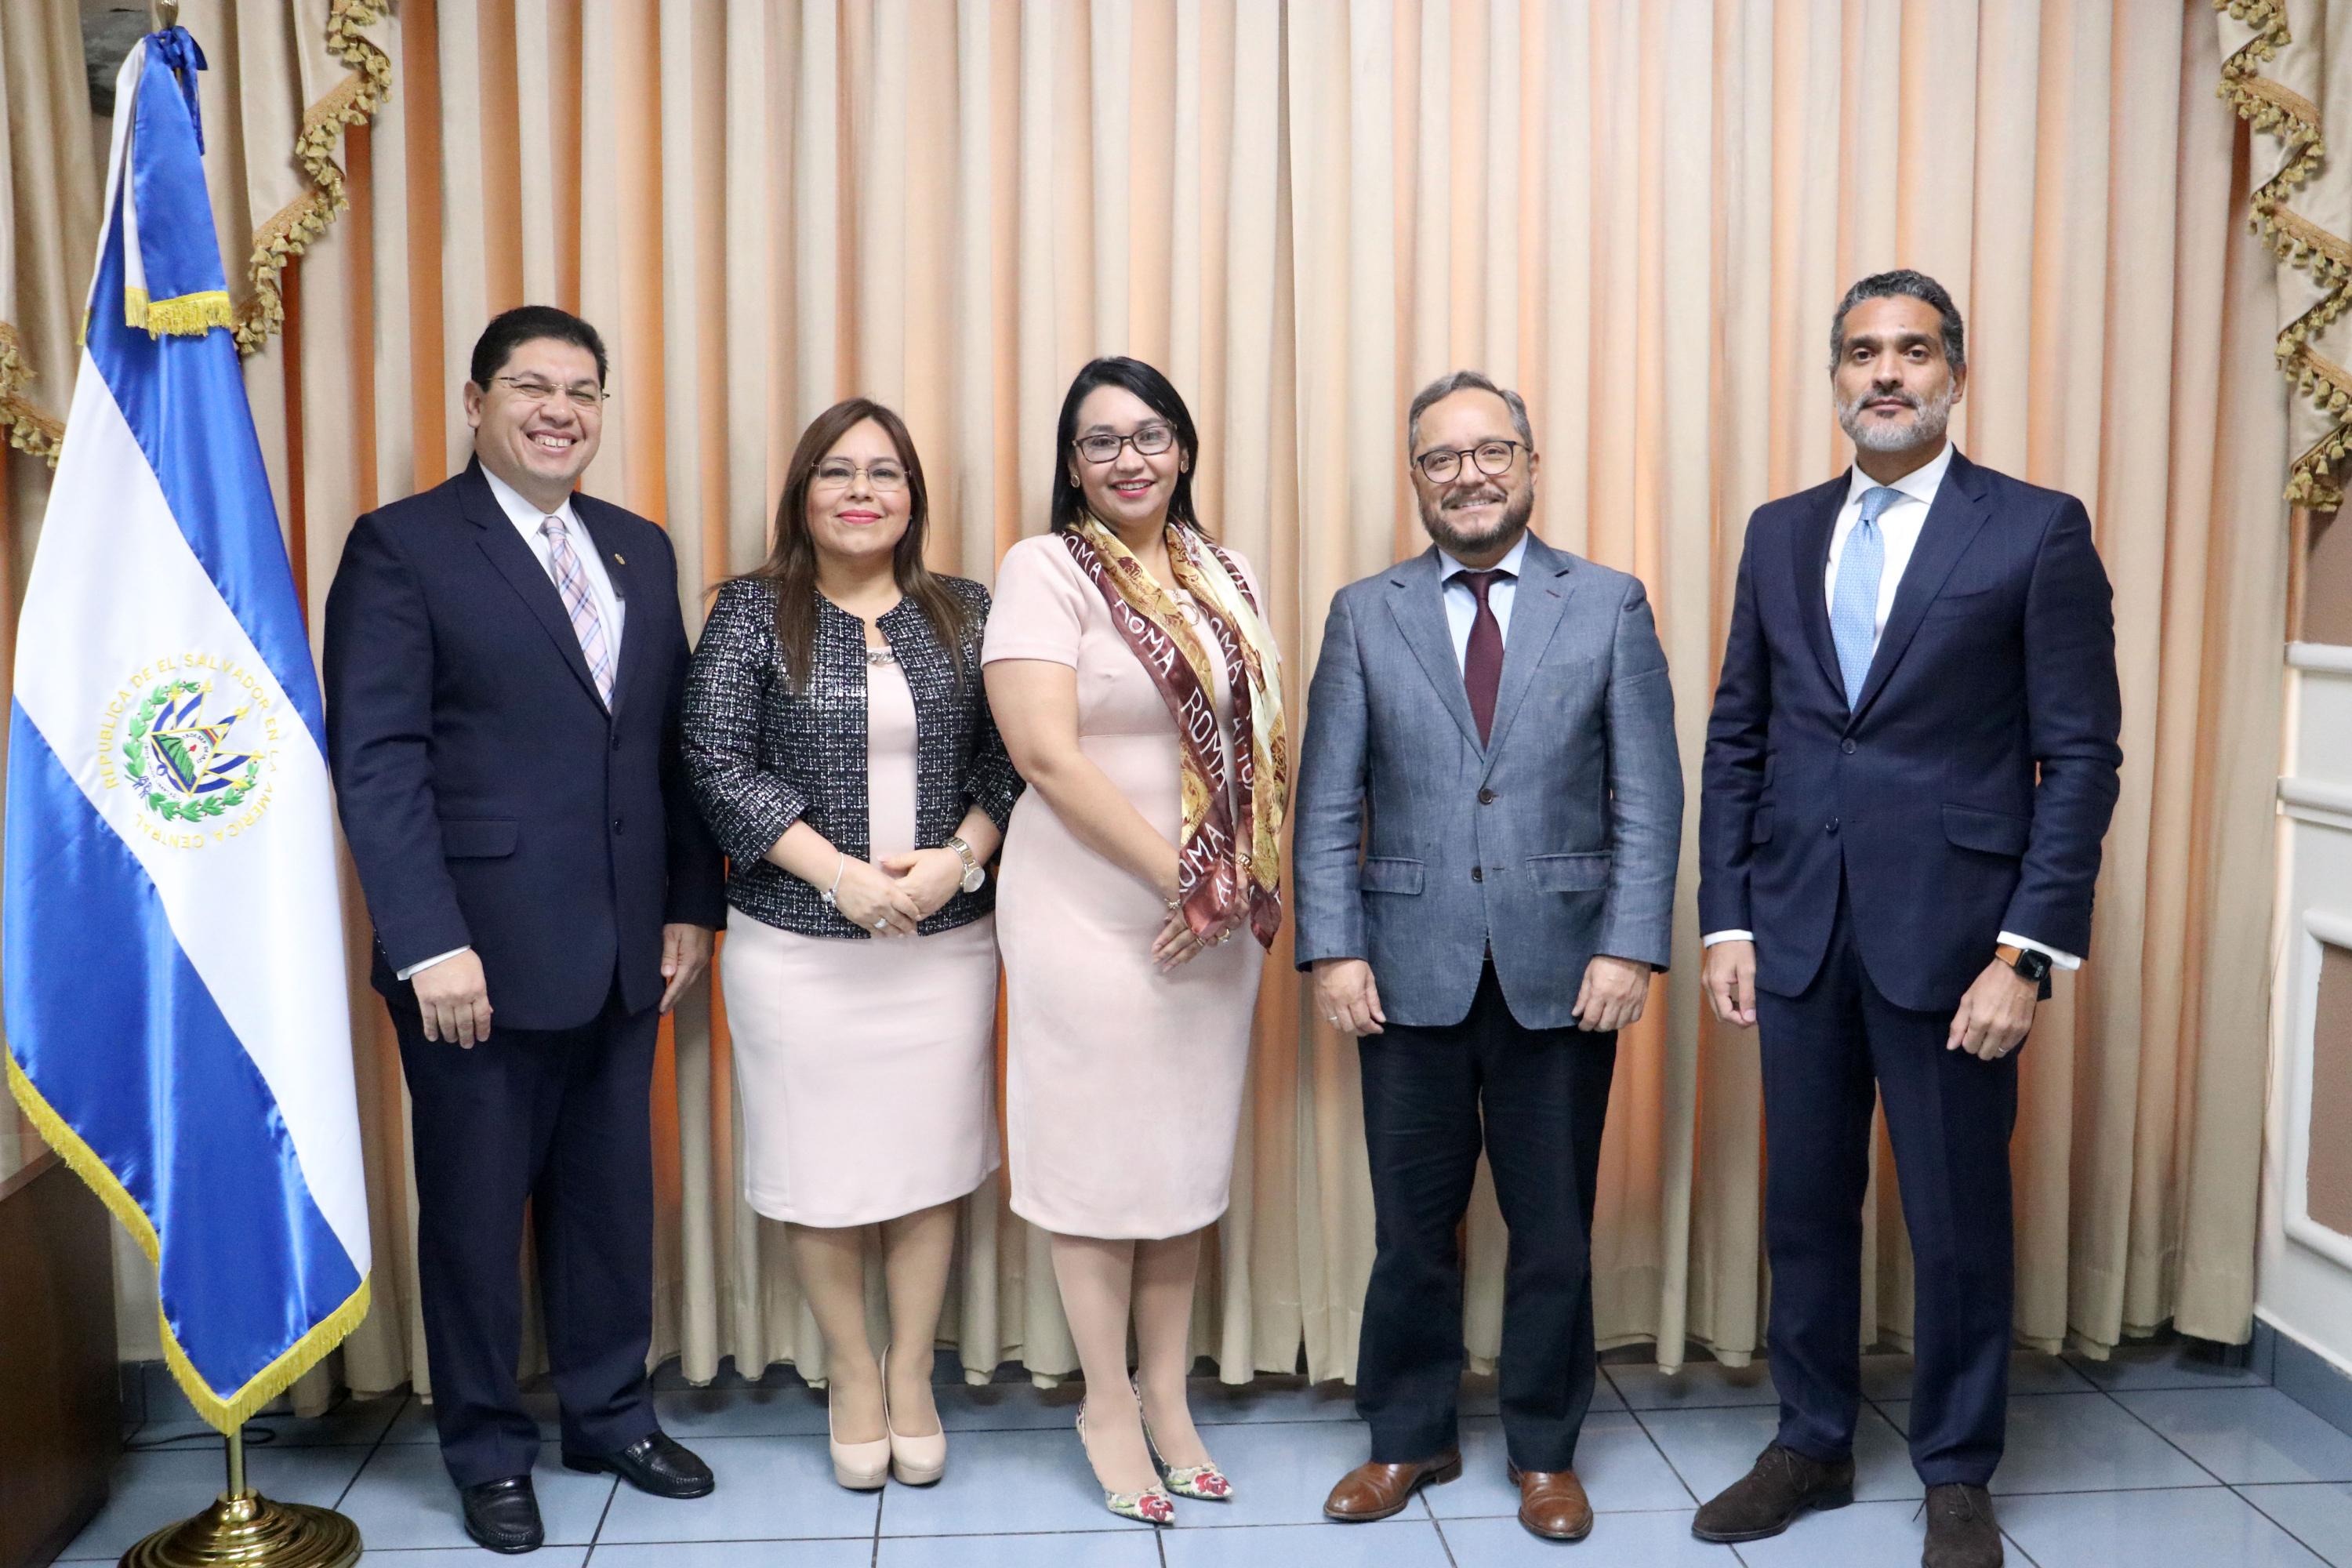 At a meeting in March, 2020, Gutiérrez and Ochaeta discussed joint training and development projects with magistrates from the Court of Accounts. Photo courtesy CCR.